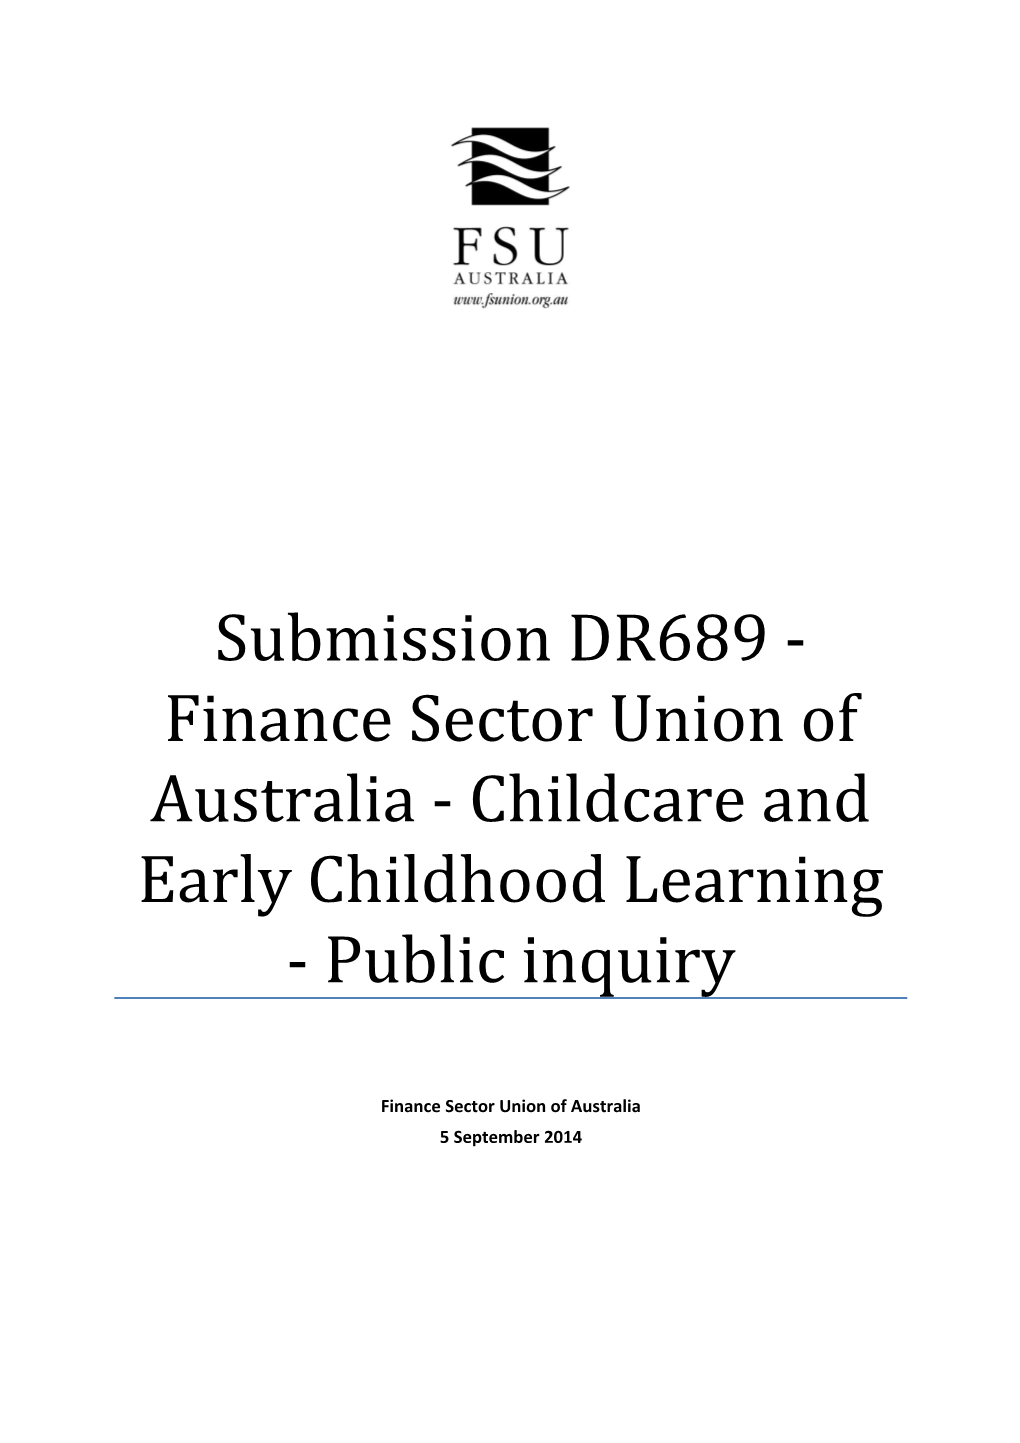 Submission DR689 - Finance Sector Union of Australia - Childcare and Early Childhood Learning